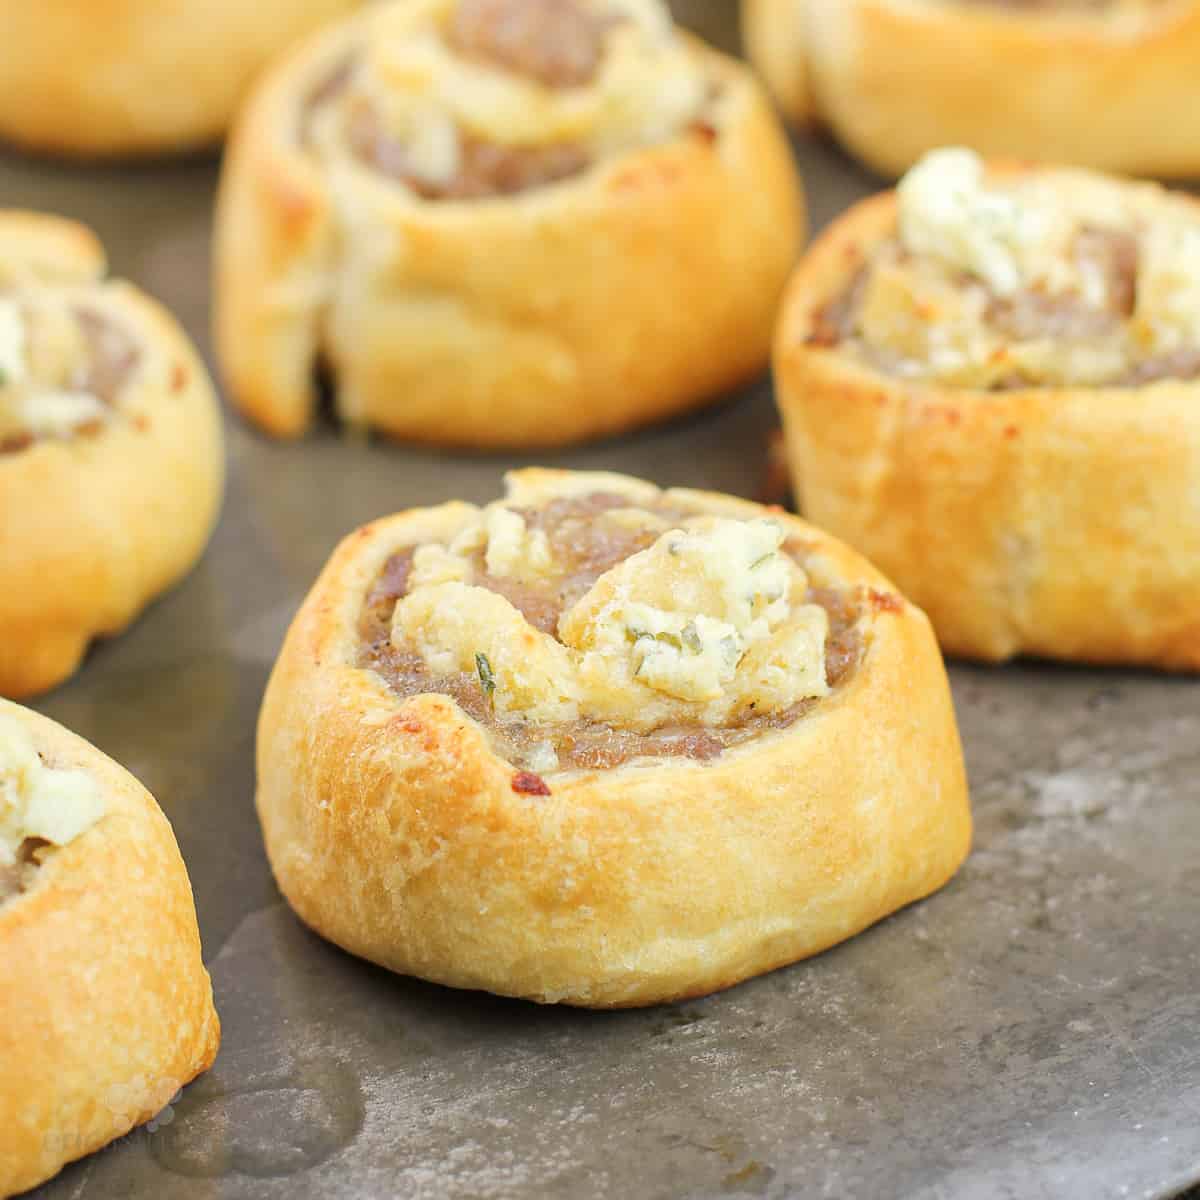 prepared crescent roll sausage pinwheels with Boursin on bake sheet